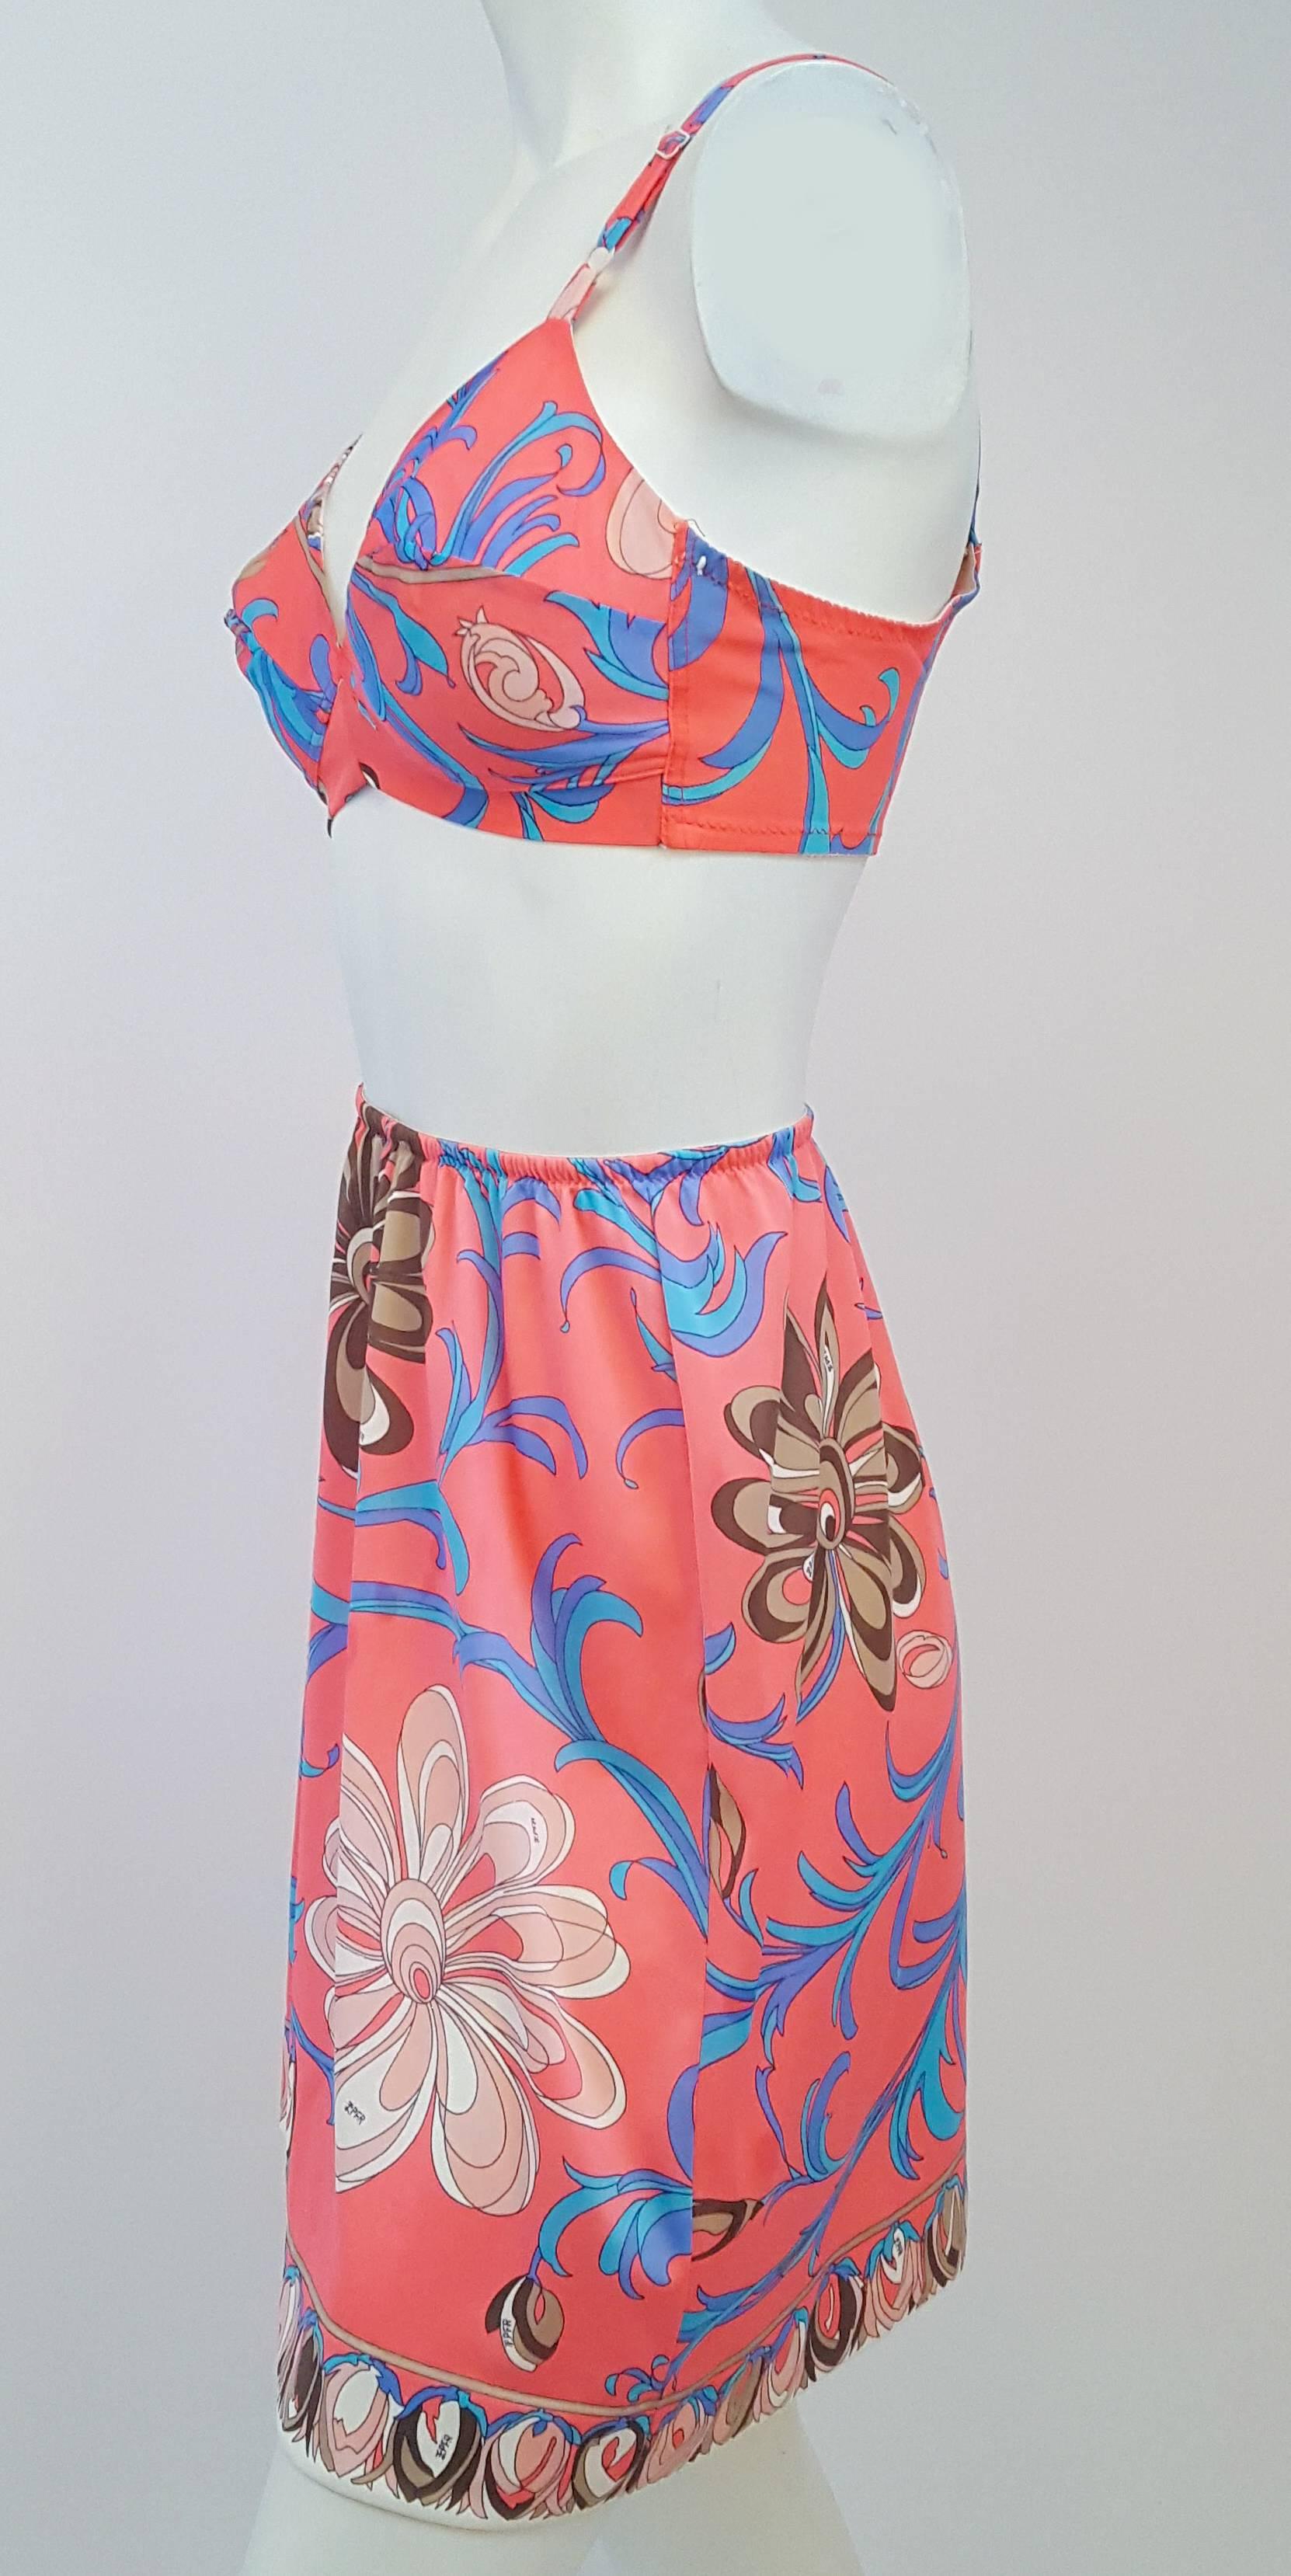 1960s Emilio Pucci Printed 3 Piece Lingerie Set. Set consists of bra, half slip, and shorts. Bra size 36B. Size small. 